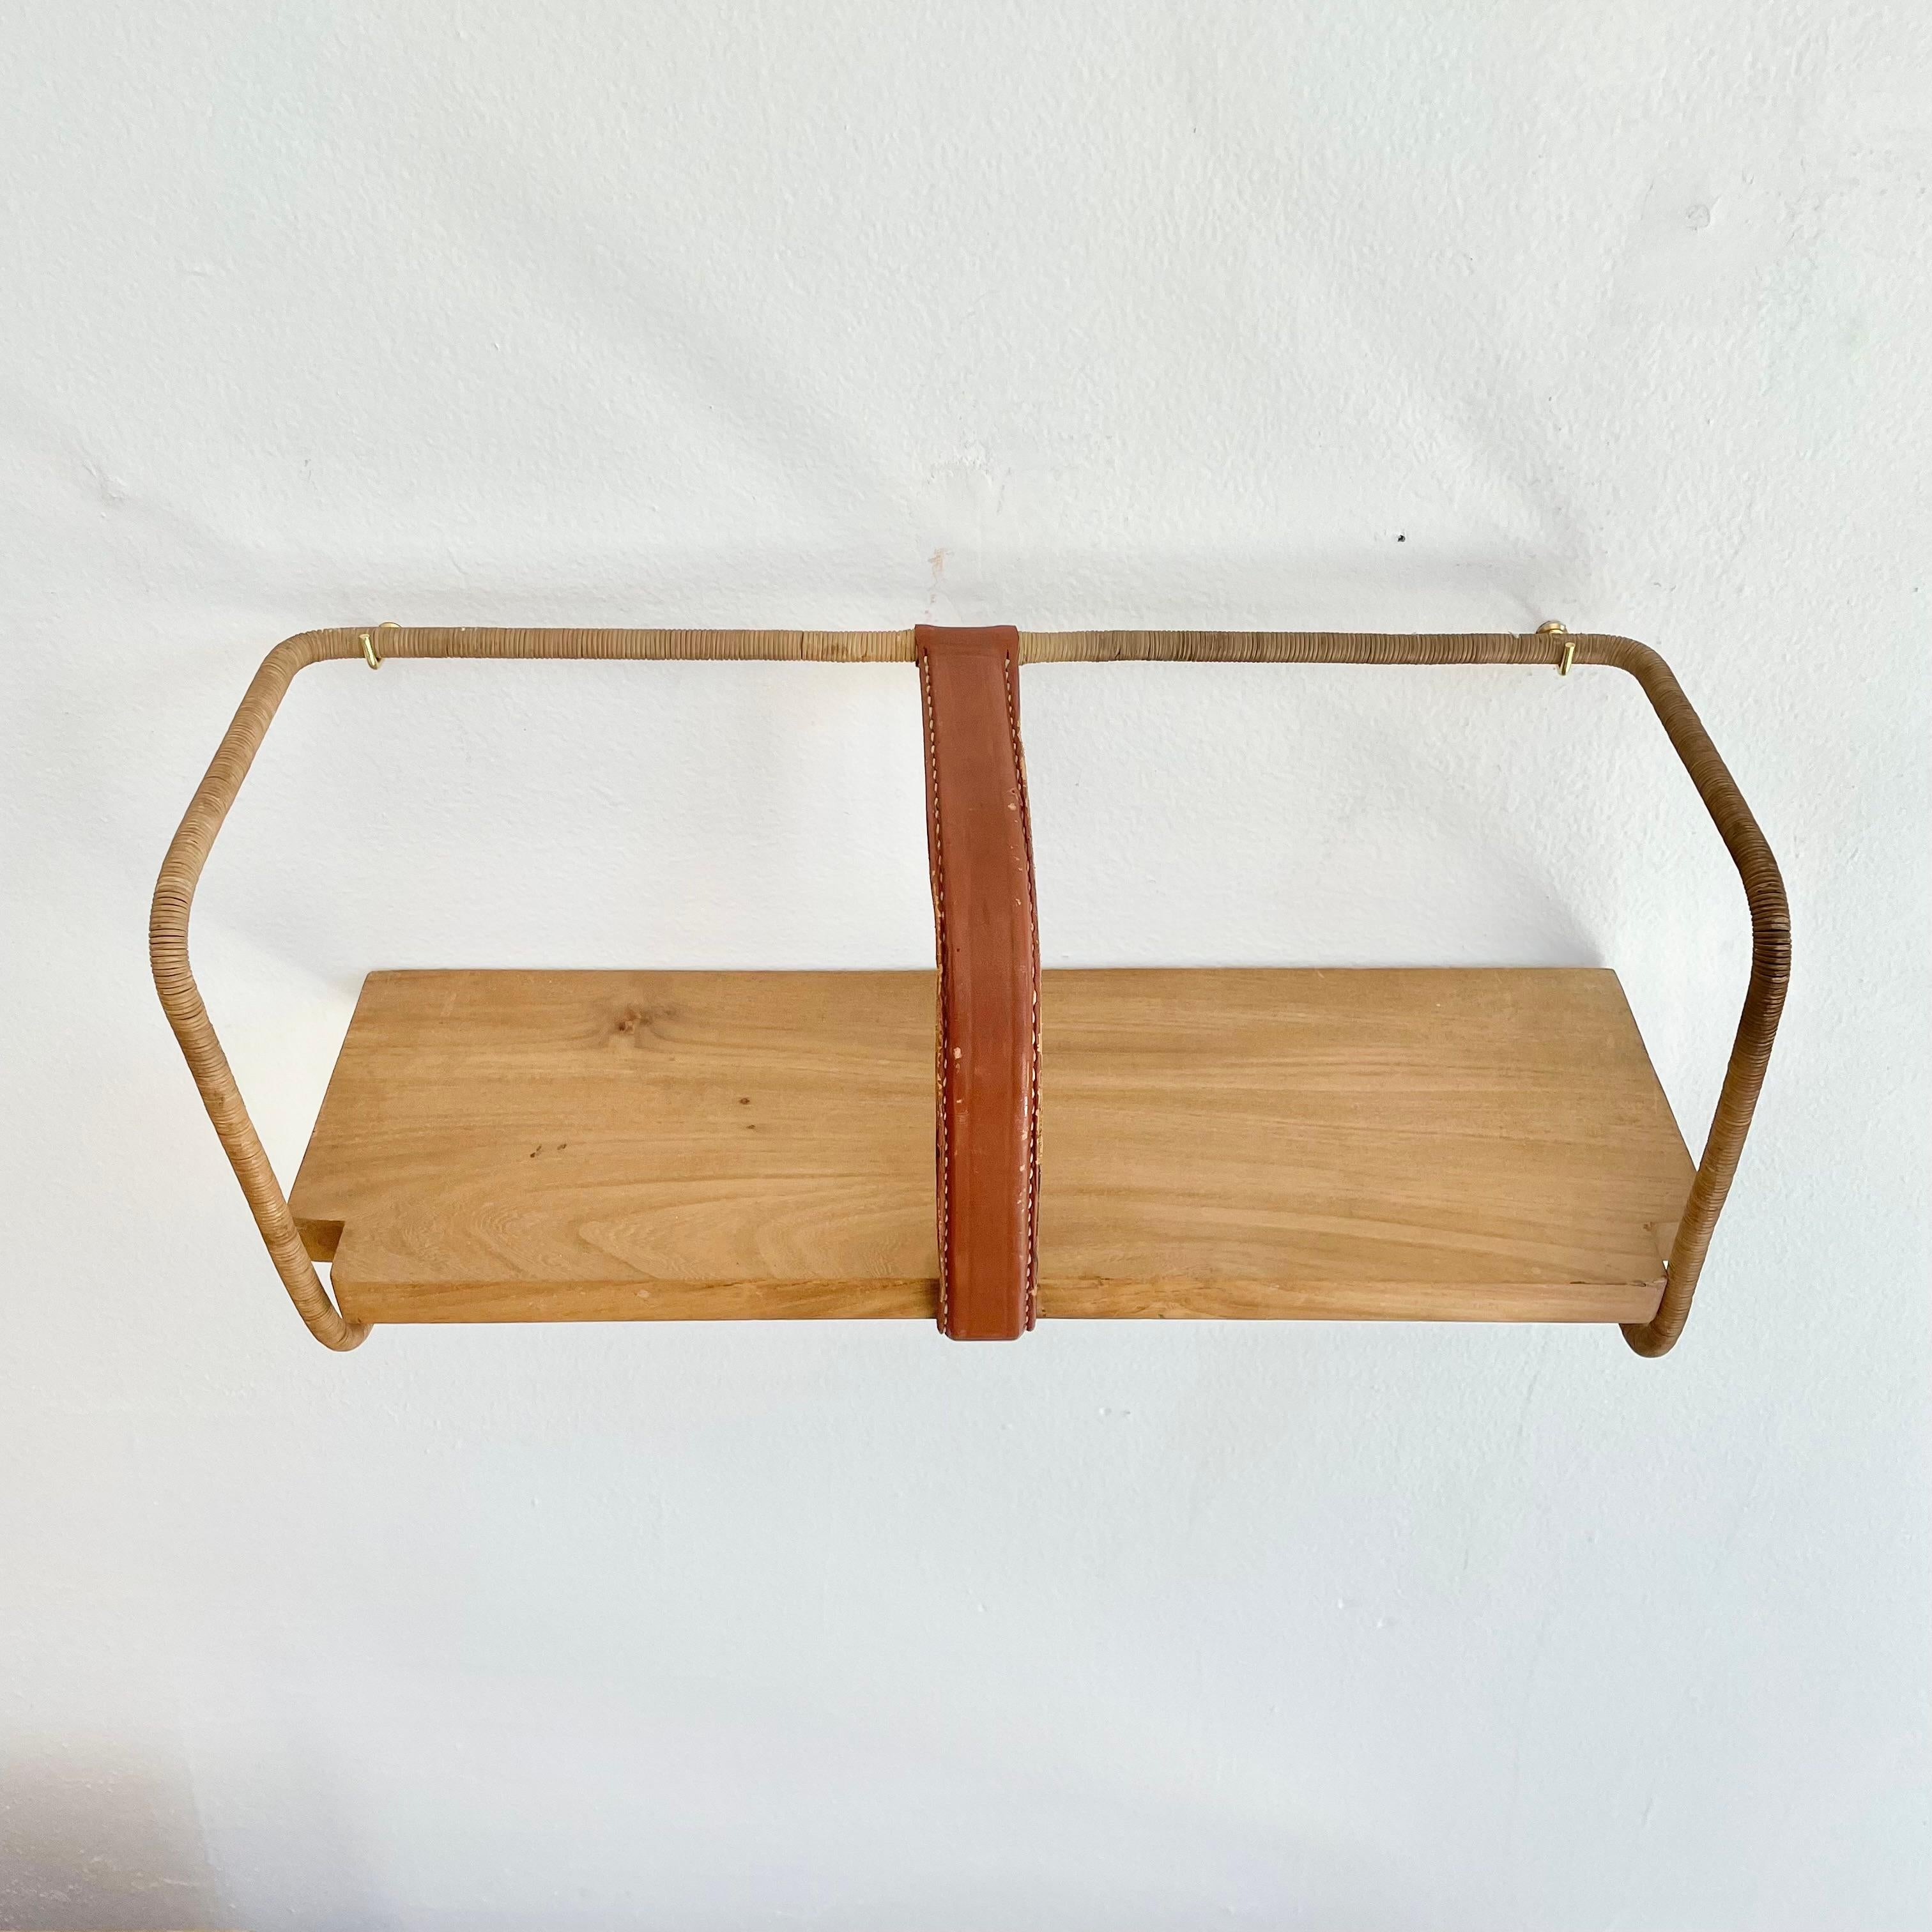 Jacques Adnet Leather, Wood and Twine Shelf, 1950s France For Sale 9